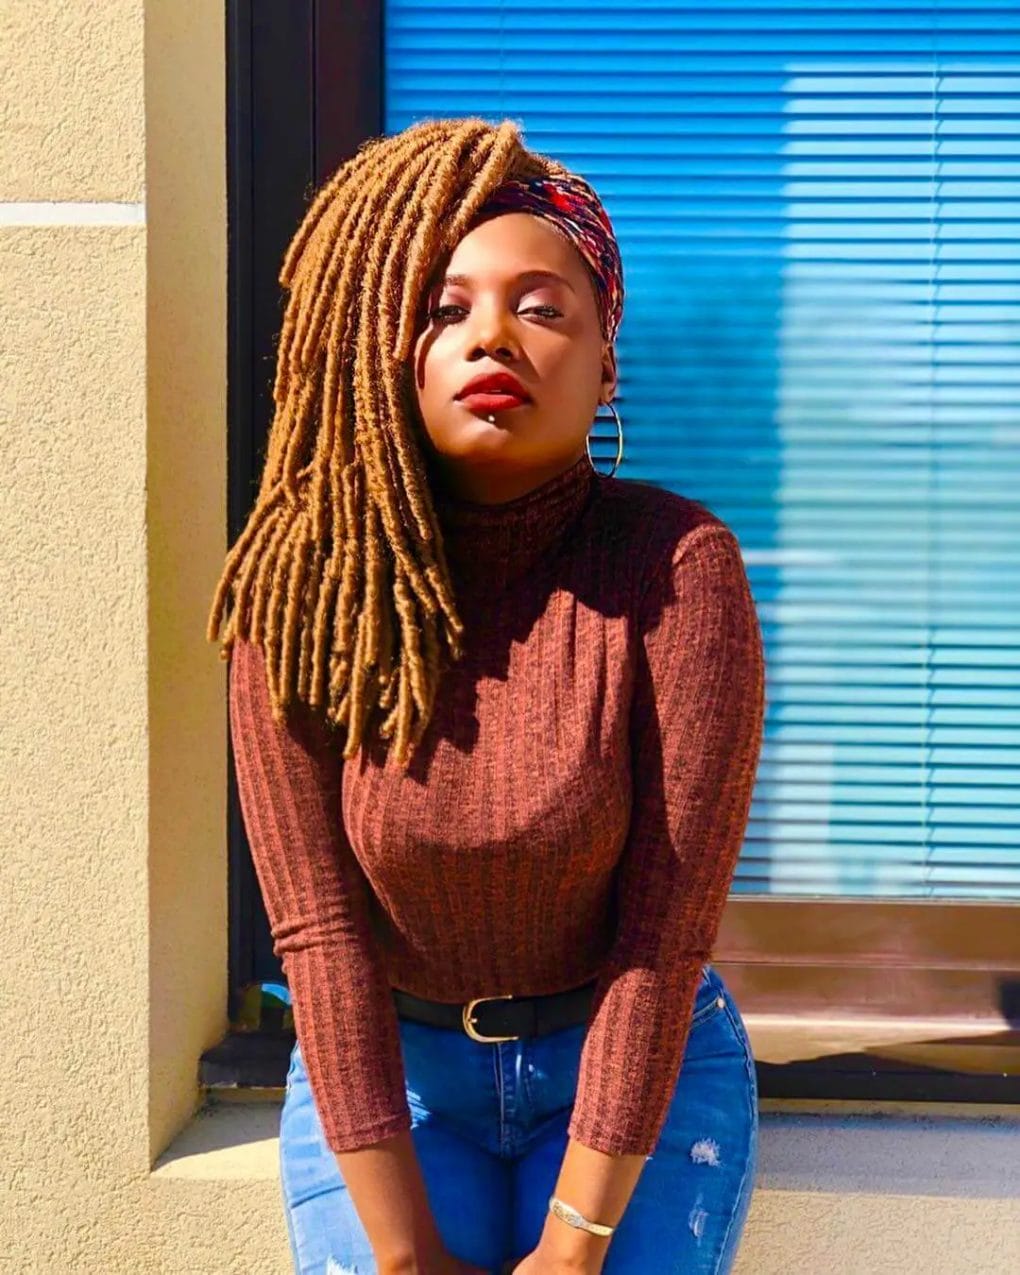 Contrast of radiant copper-colored dreadlocks cascading from crown to shoulders.